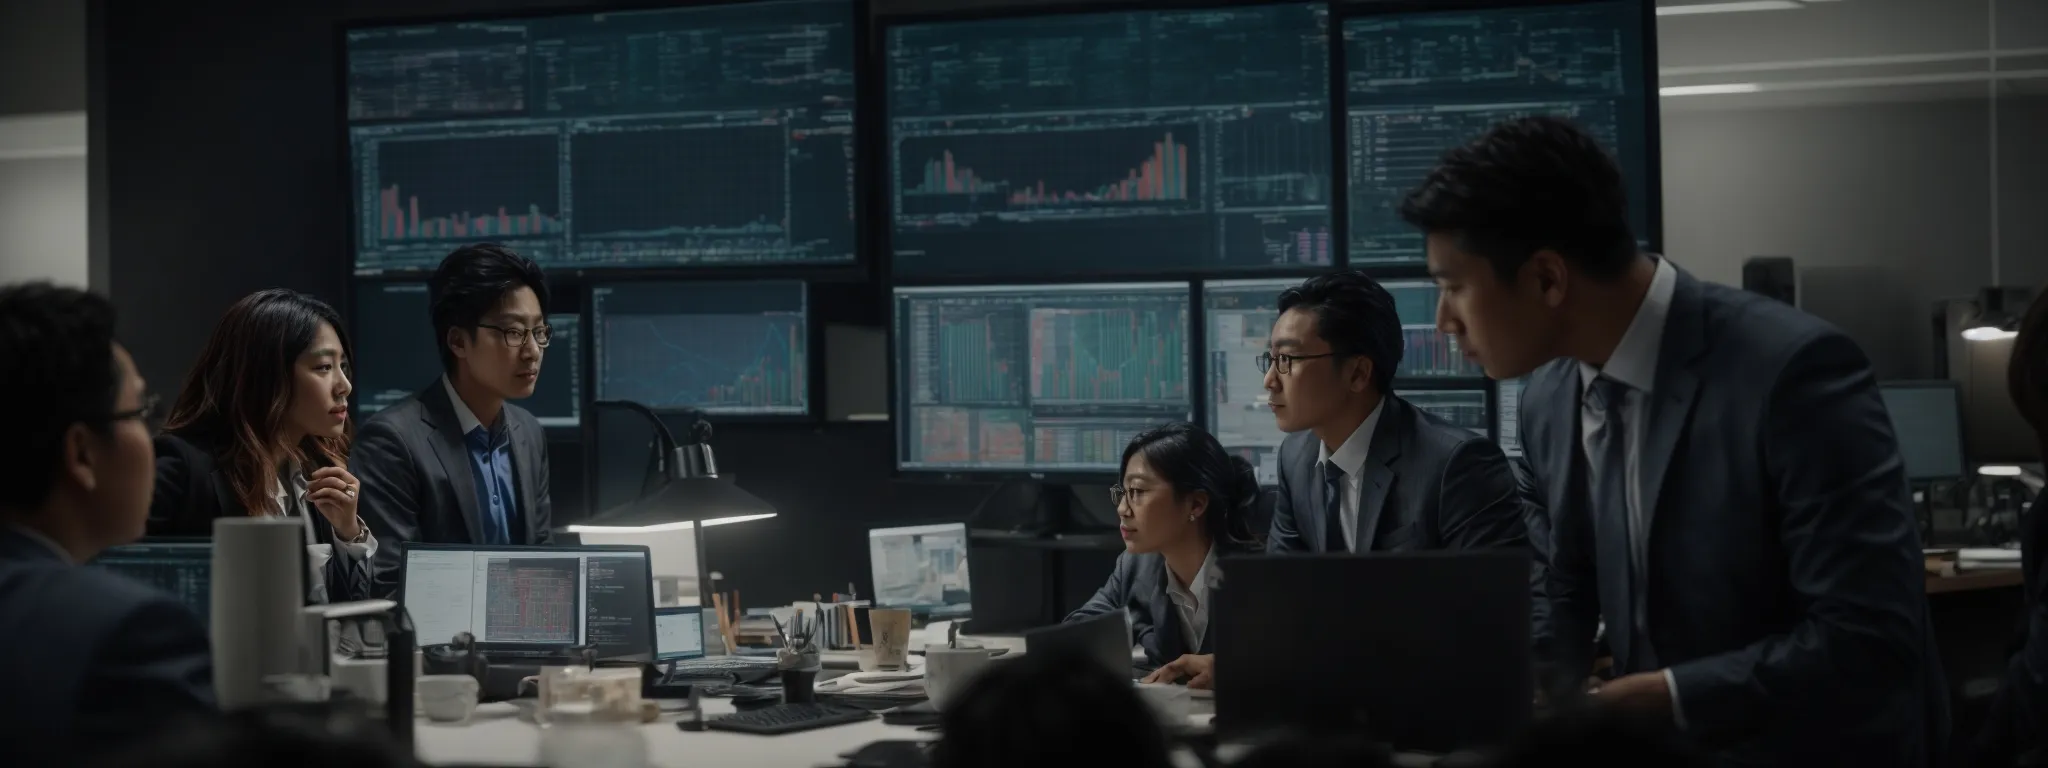 a diverse group of professionals gathered around a large computer monitor, analyzing graphs and strategy documents.